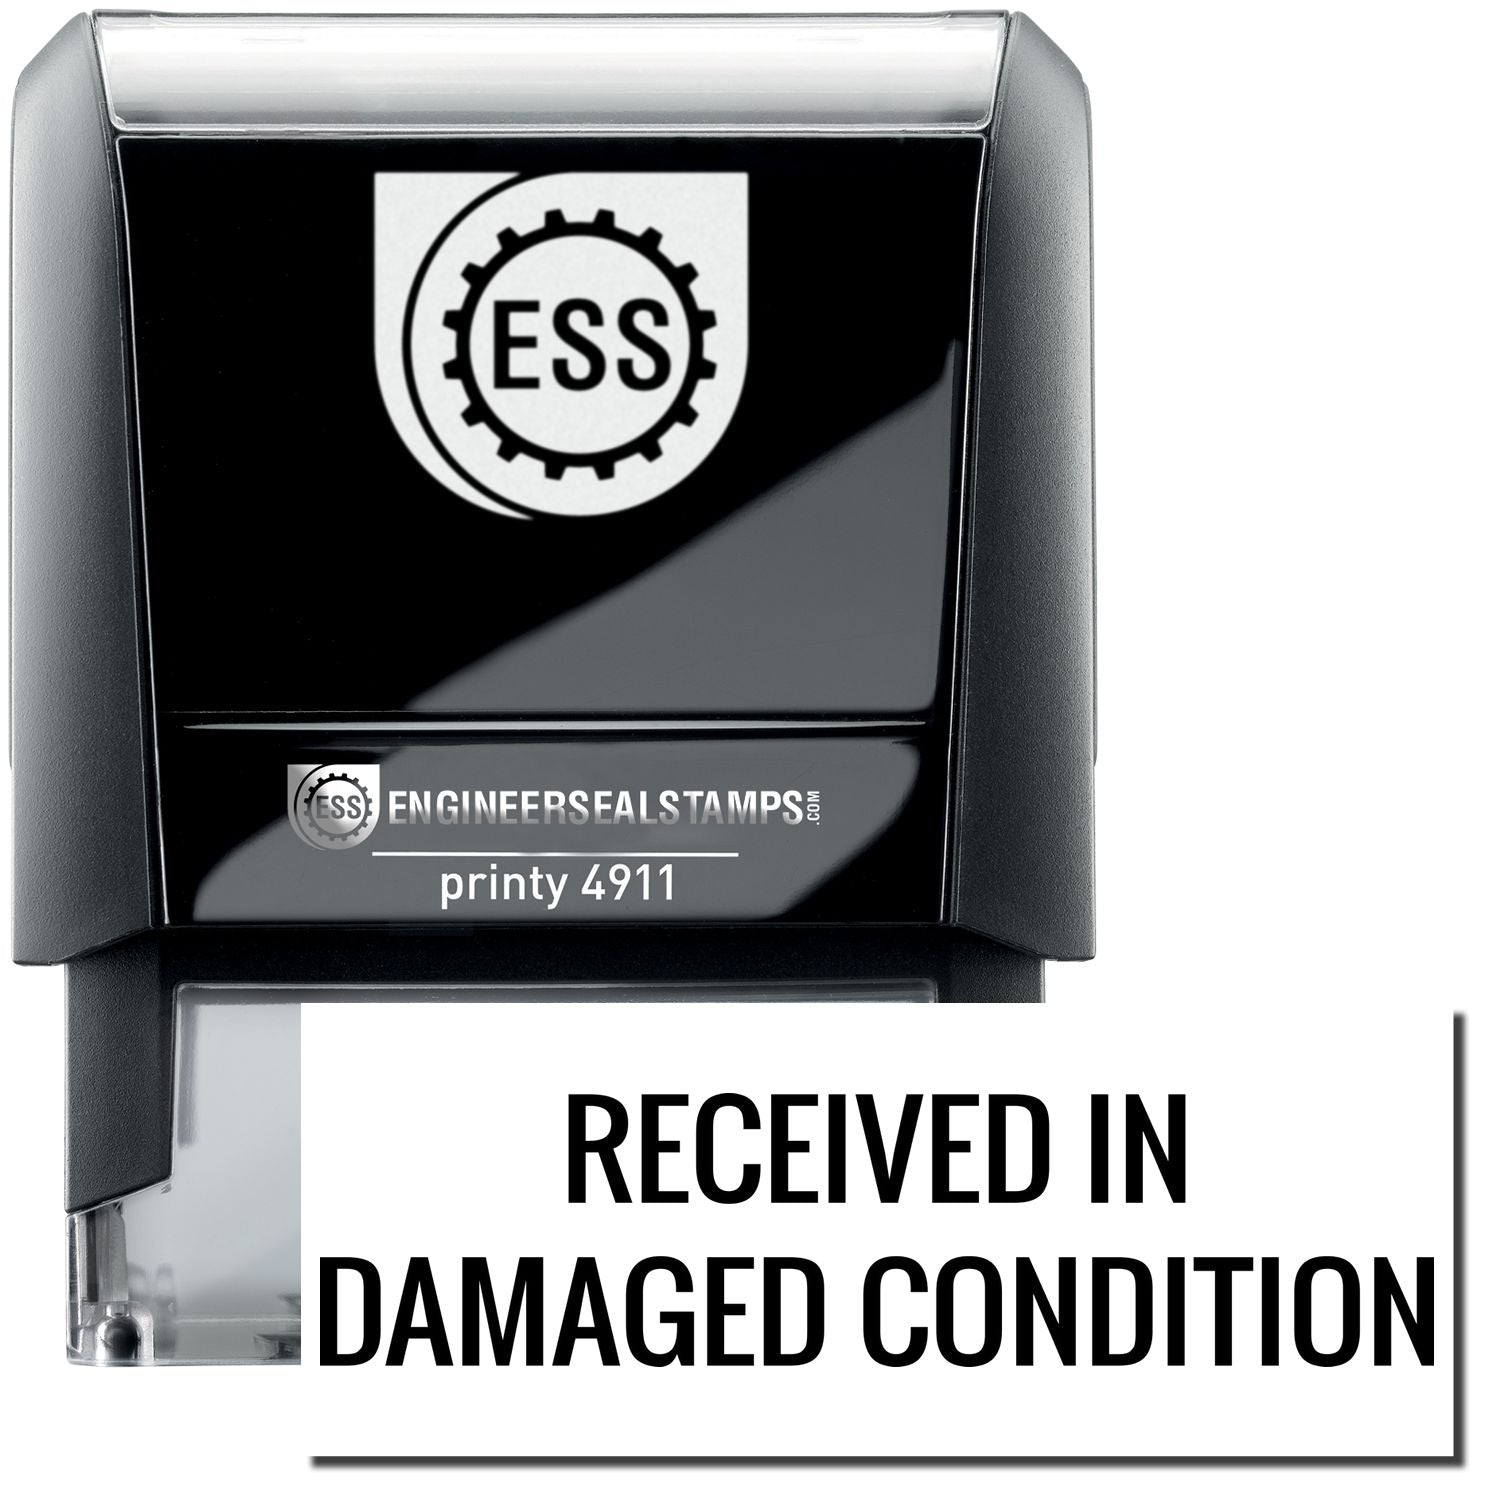 A self-inking stamp with a stamped image showing how the text "RECEIVED IN DAMAGED CONDITION" is displayed after stamping.